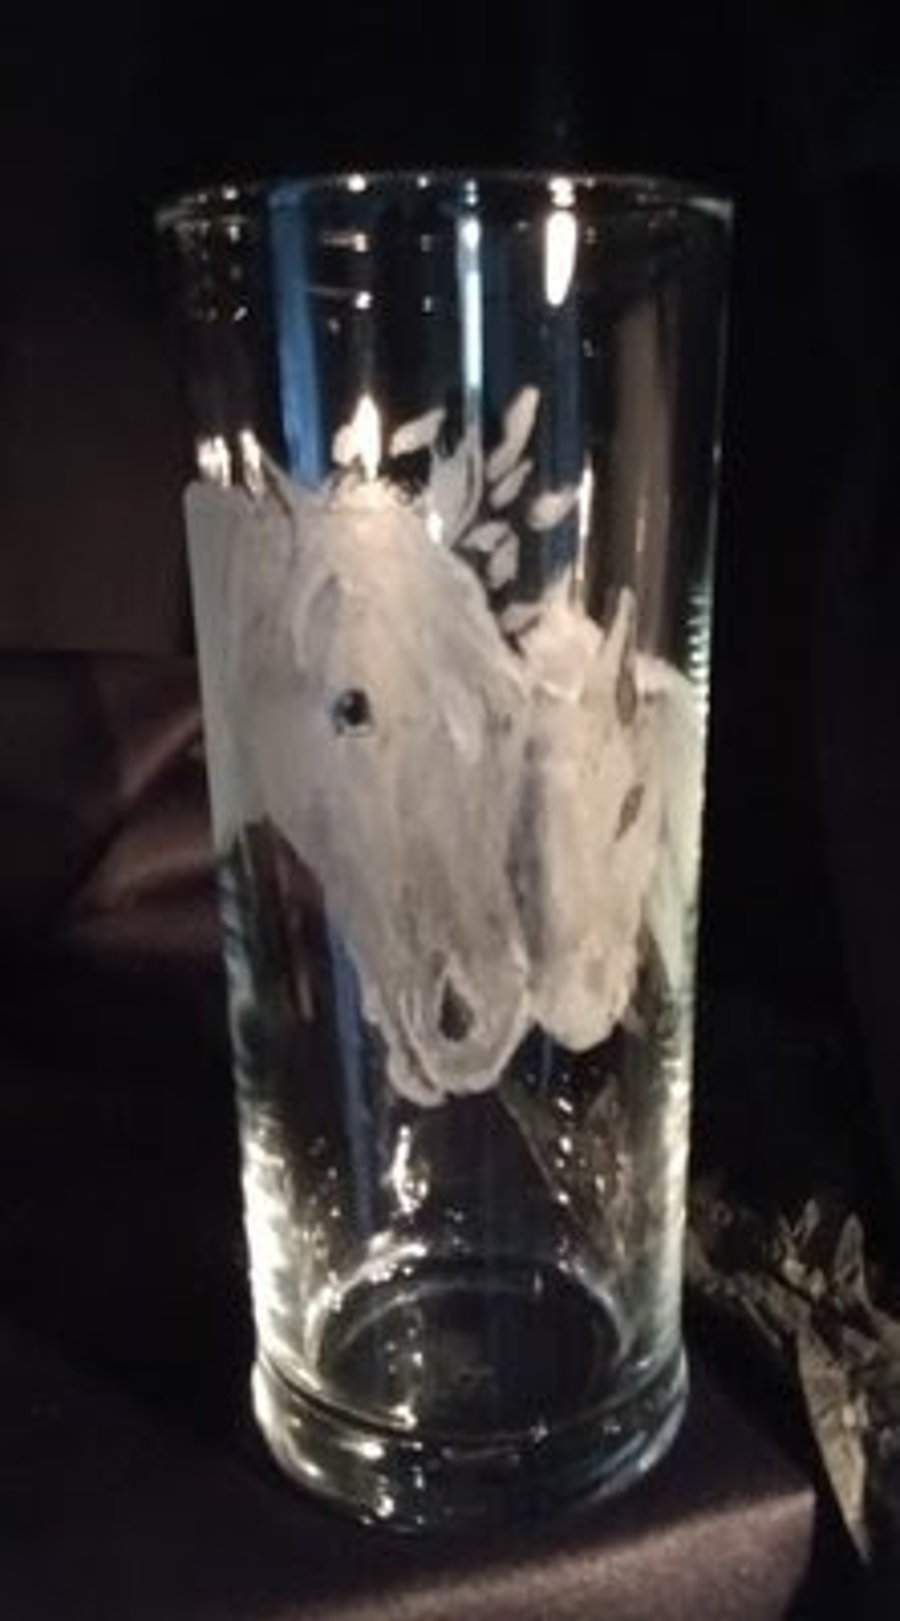 Horses on a tall glass tumbler